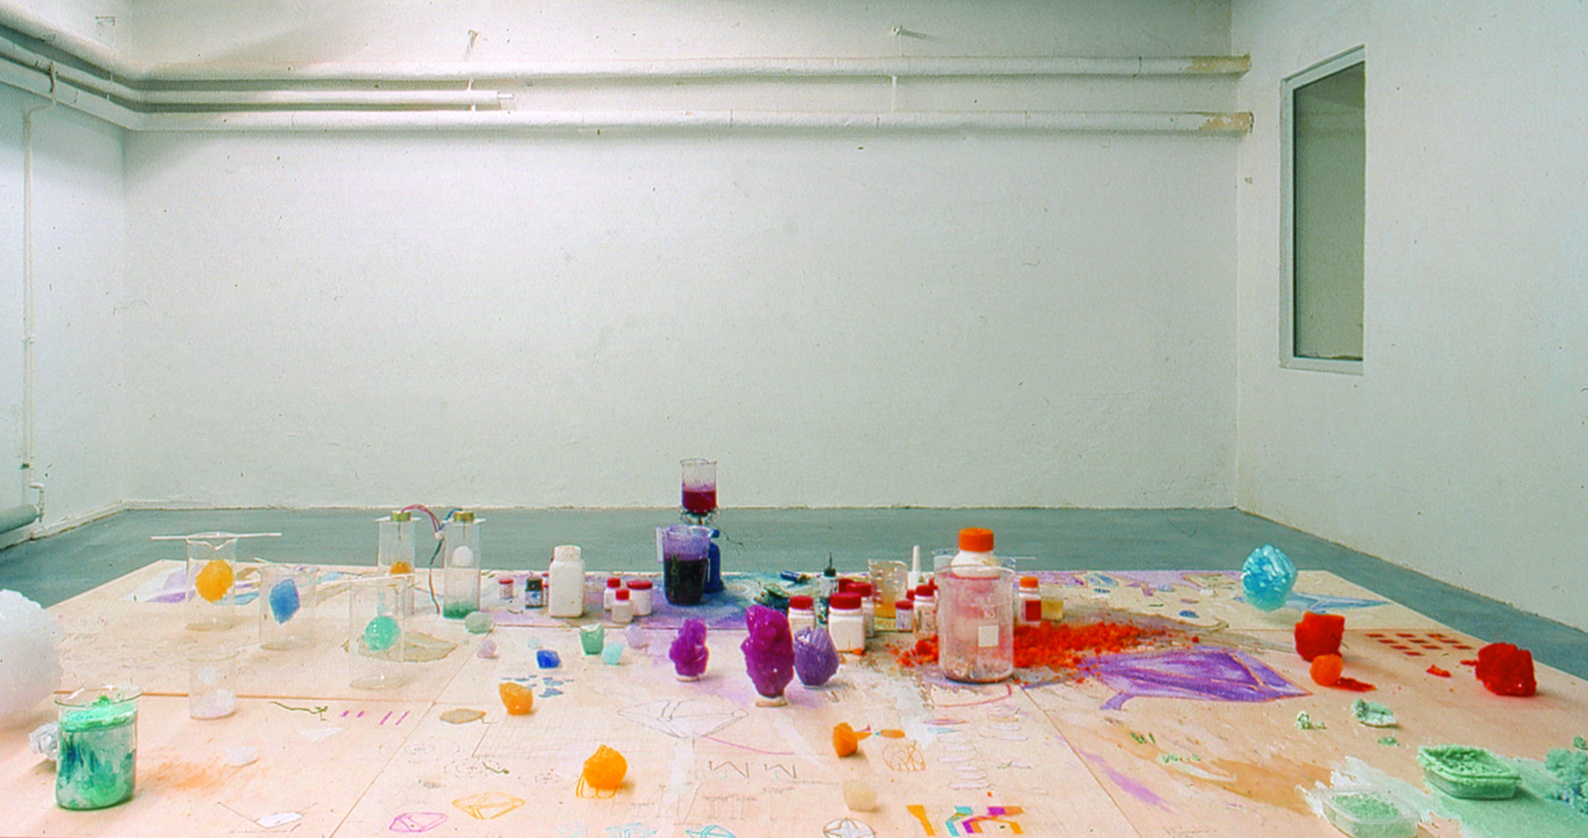 View of the exhibition "Fiction & Science». In the foreground a table with colorful crystals and chemicals.